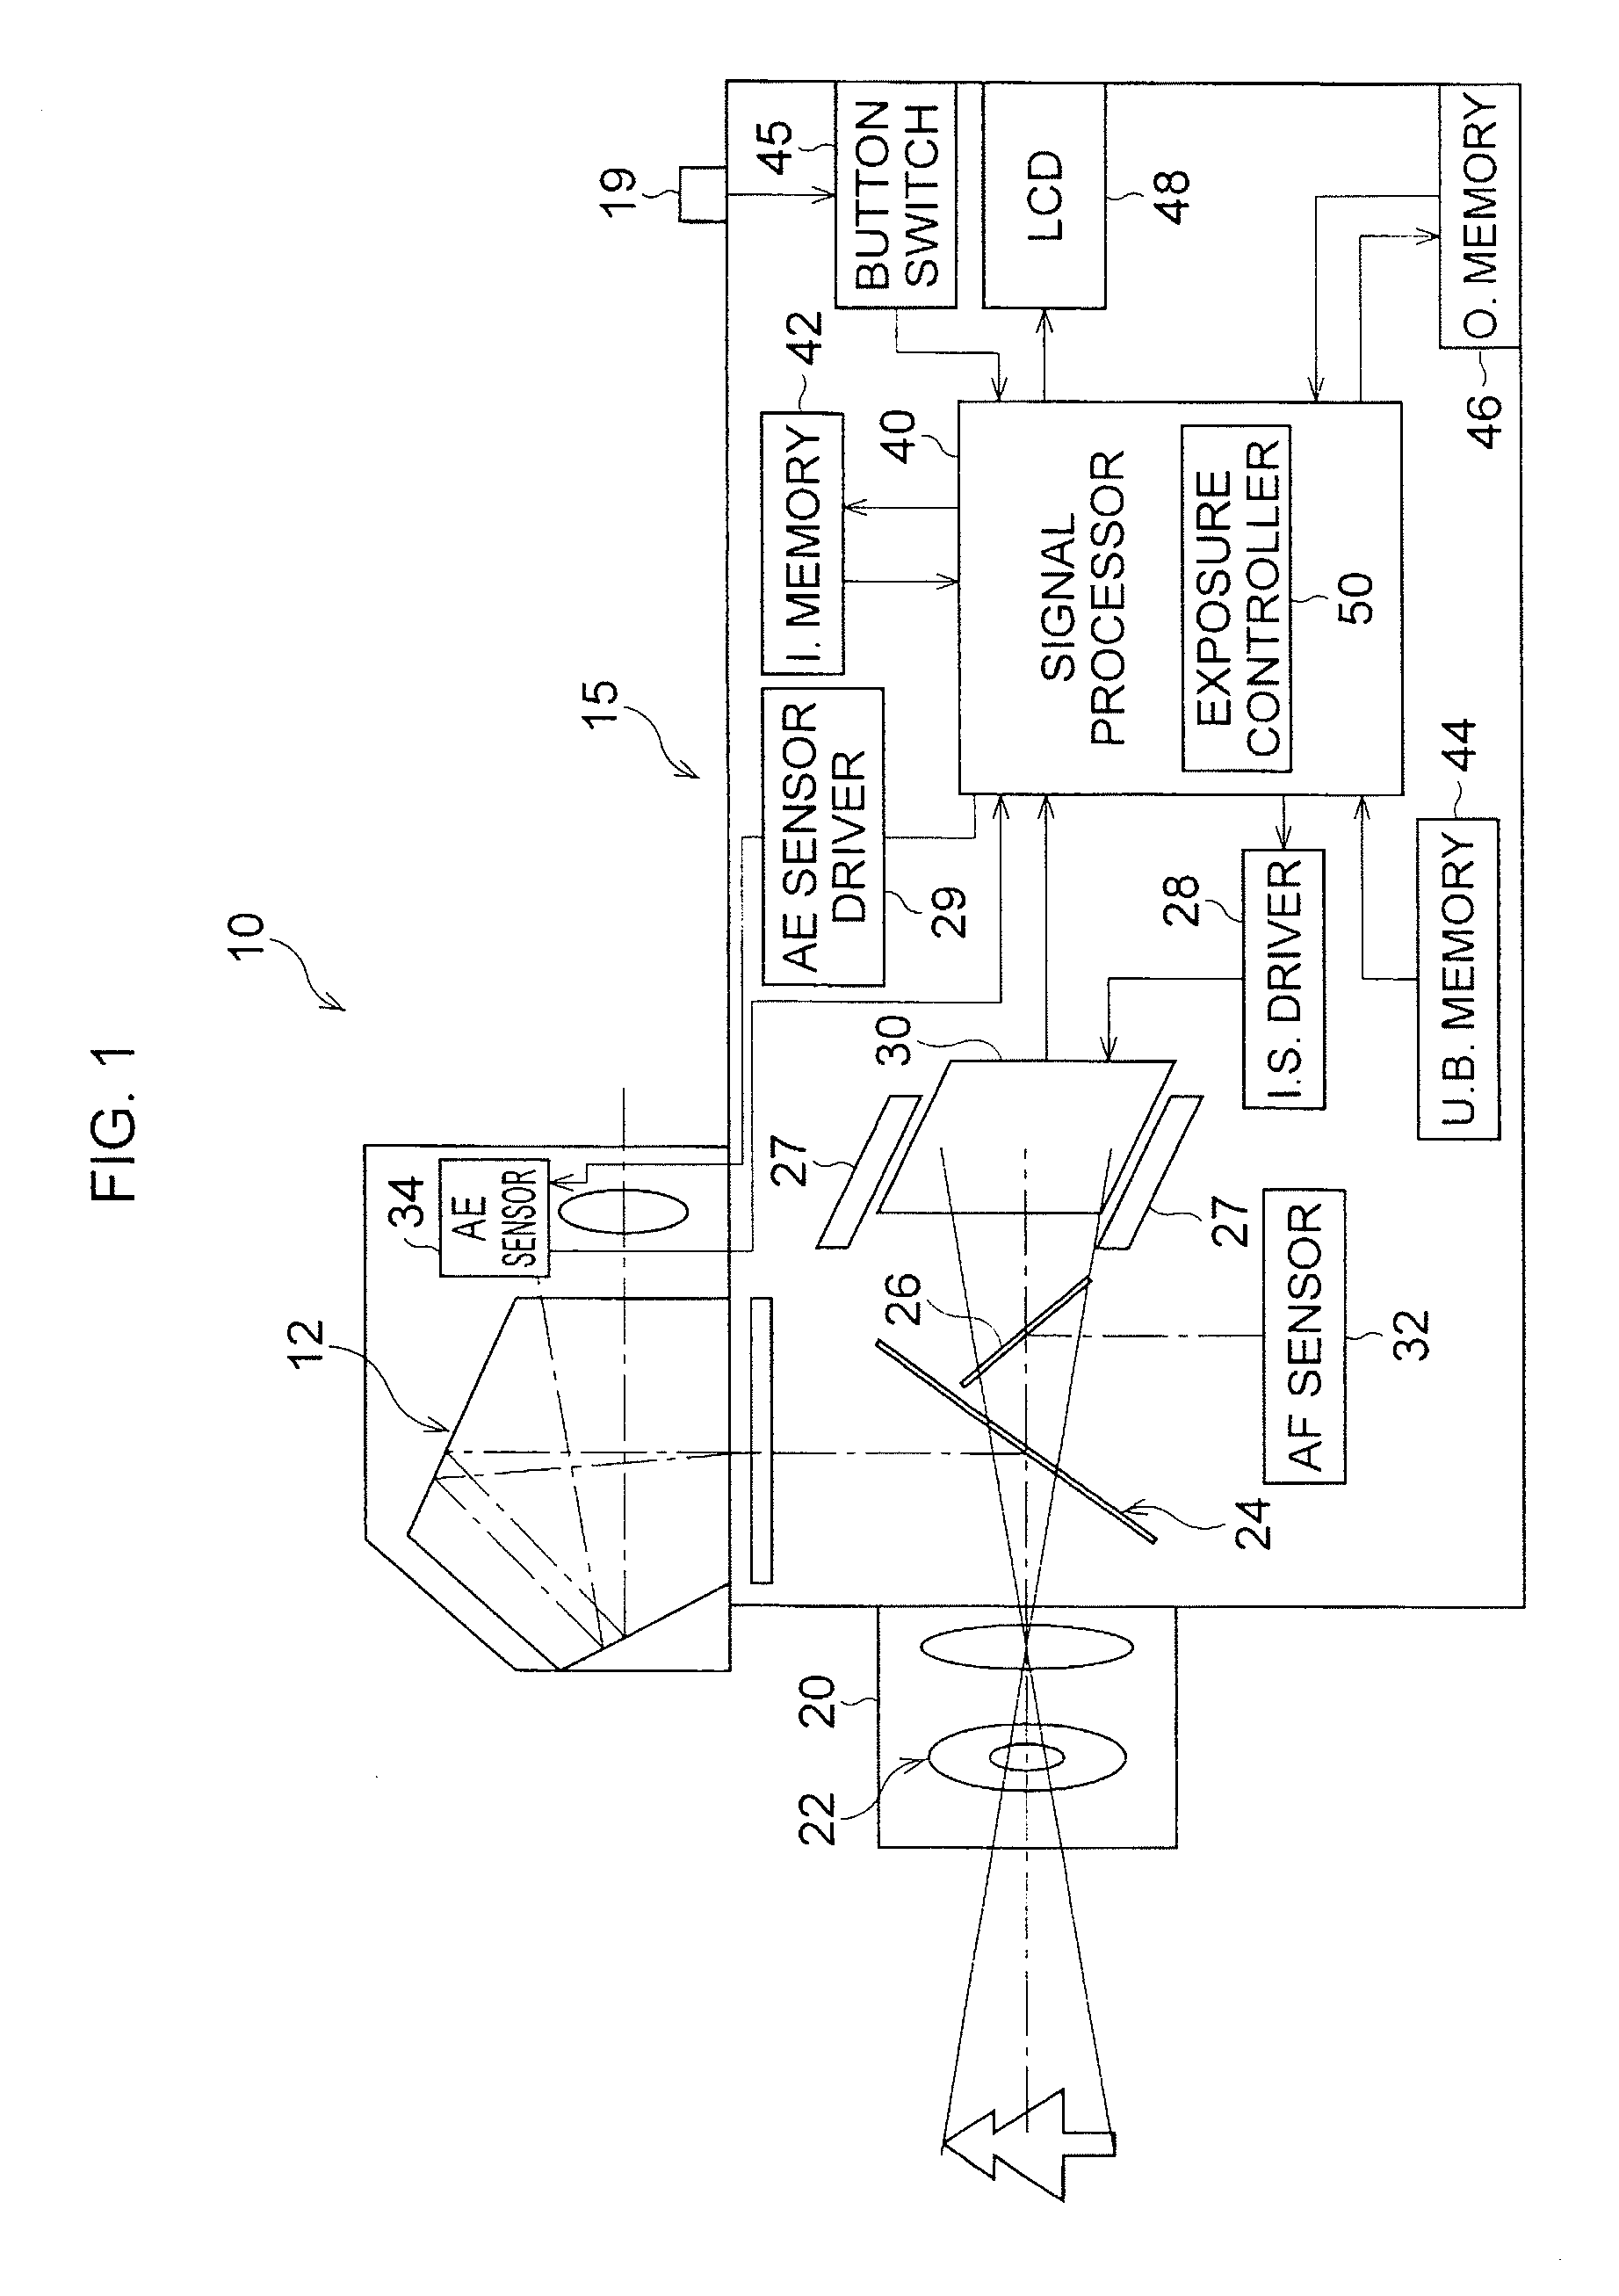 Method and apparatus for imaging an object